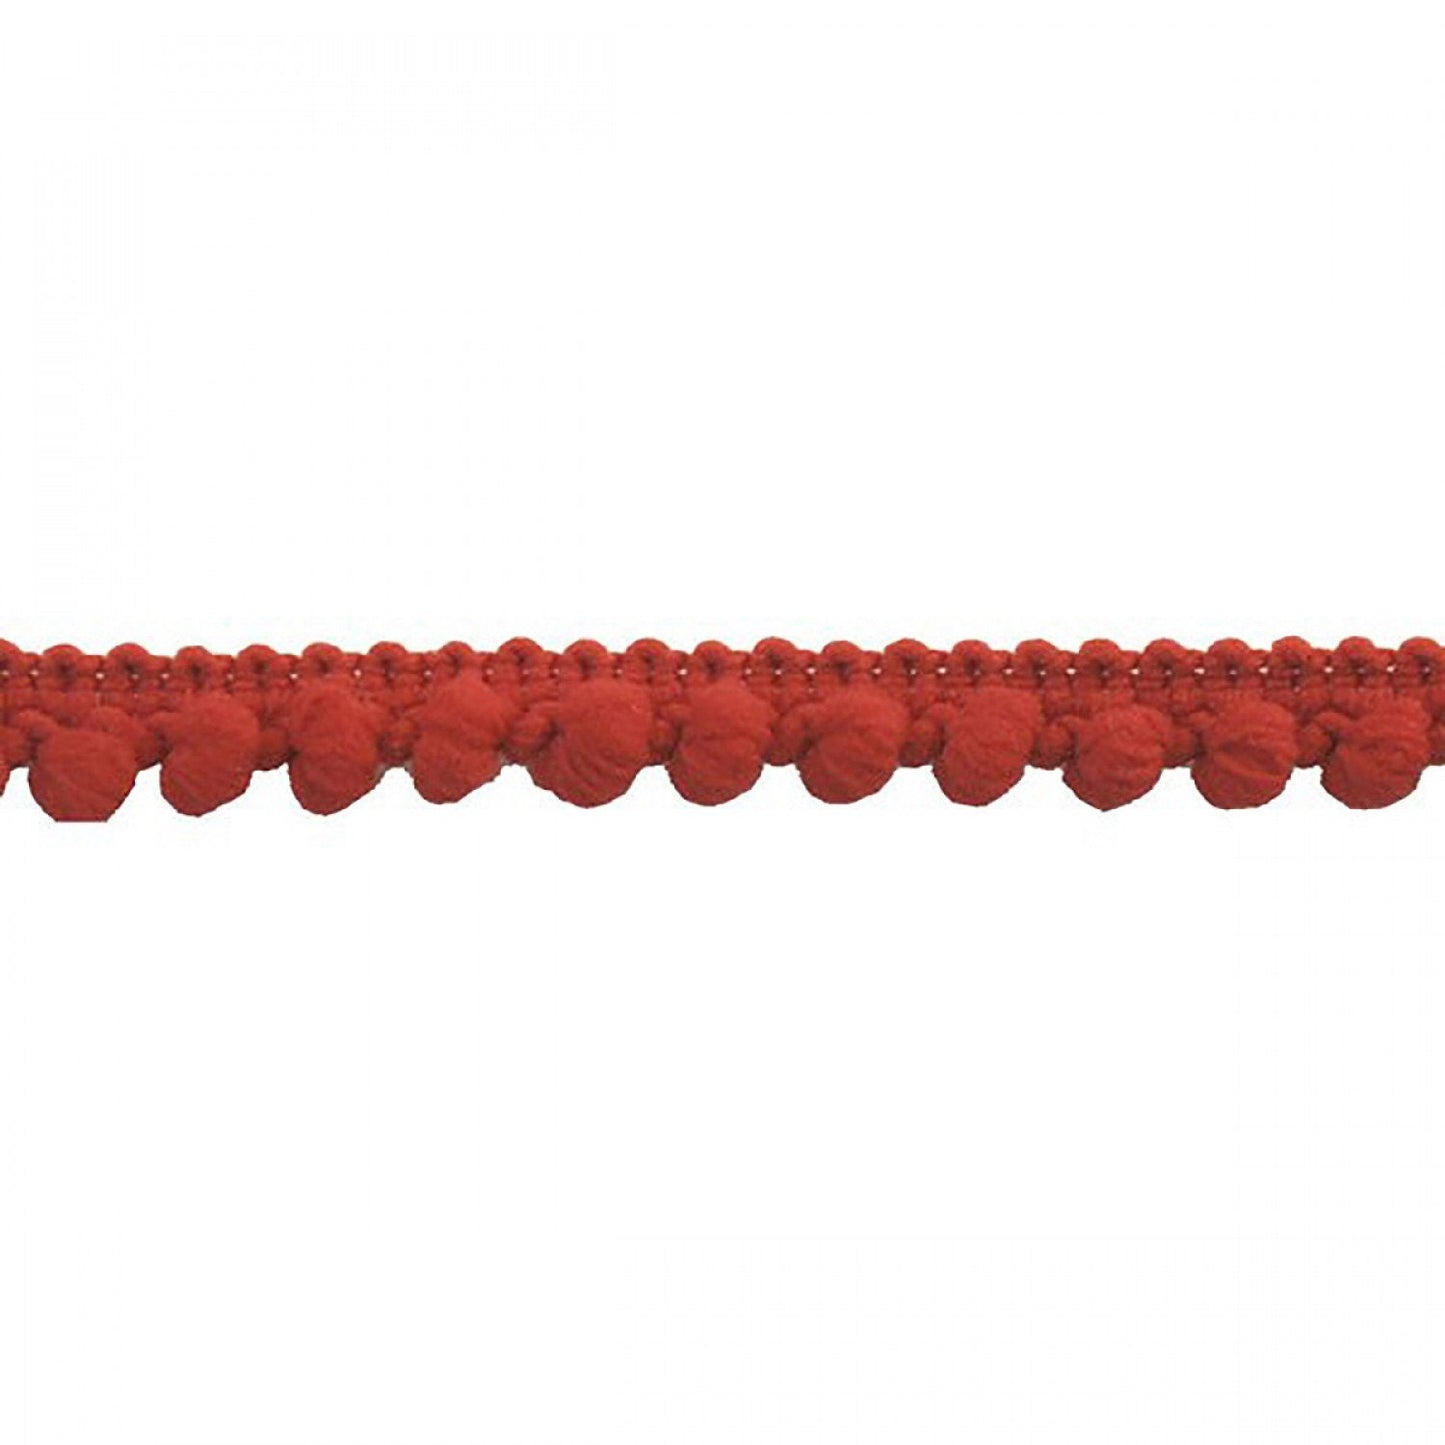 Red 3/8 inch Pompom trim - 3/16 inch ball size - sold by the yard